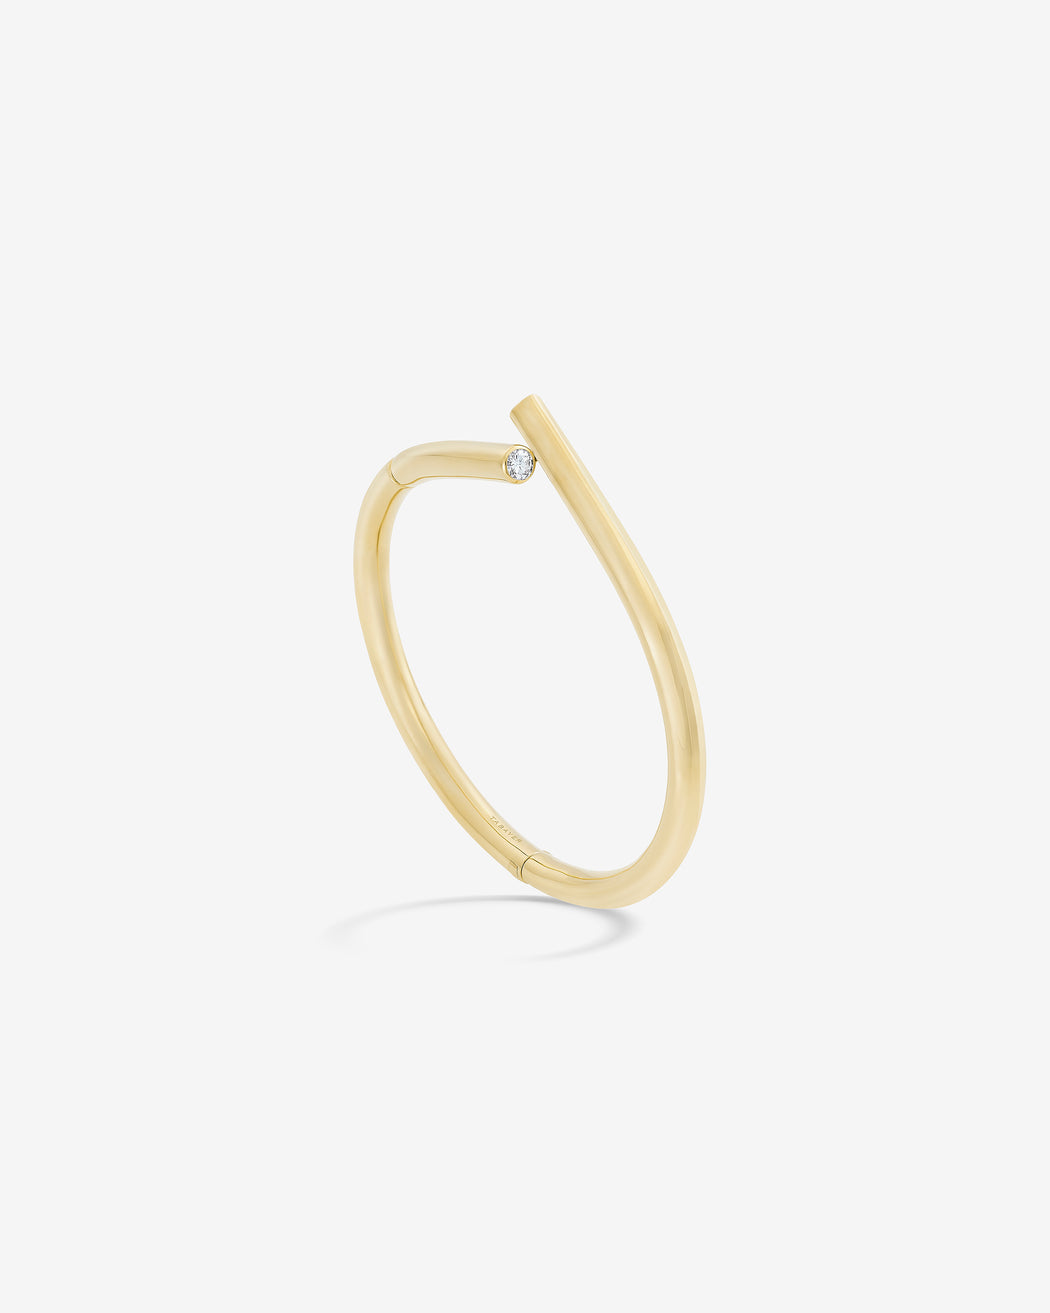 Oera bracelet 18k Fairmined yellow gold and diamond, Tabayer ethical fine jewelry